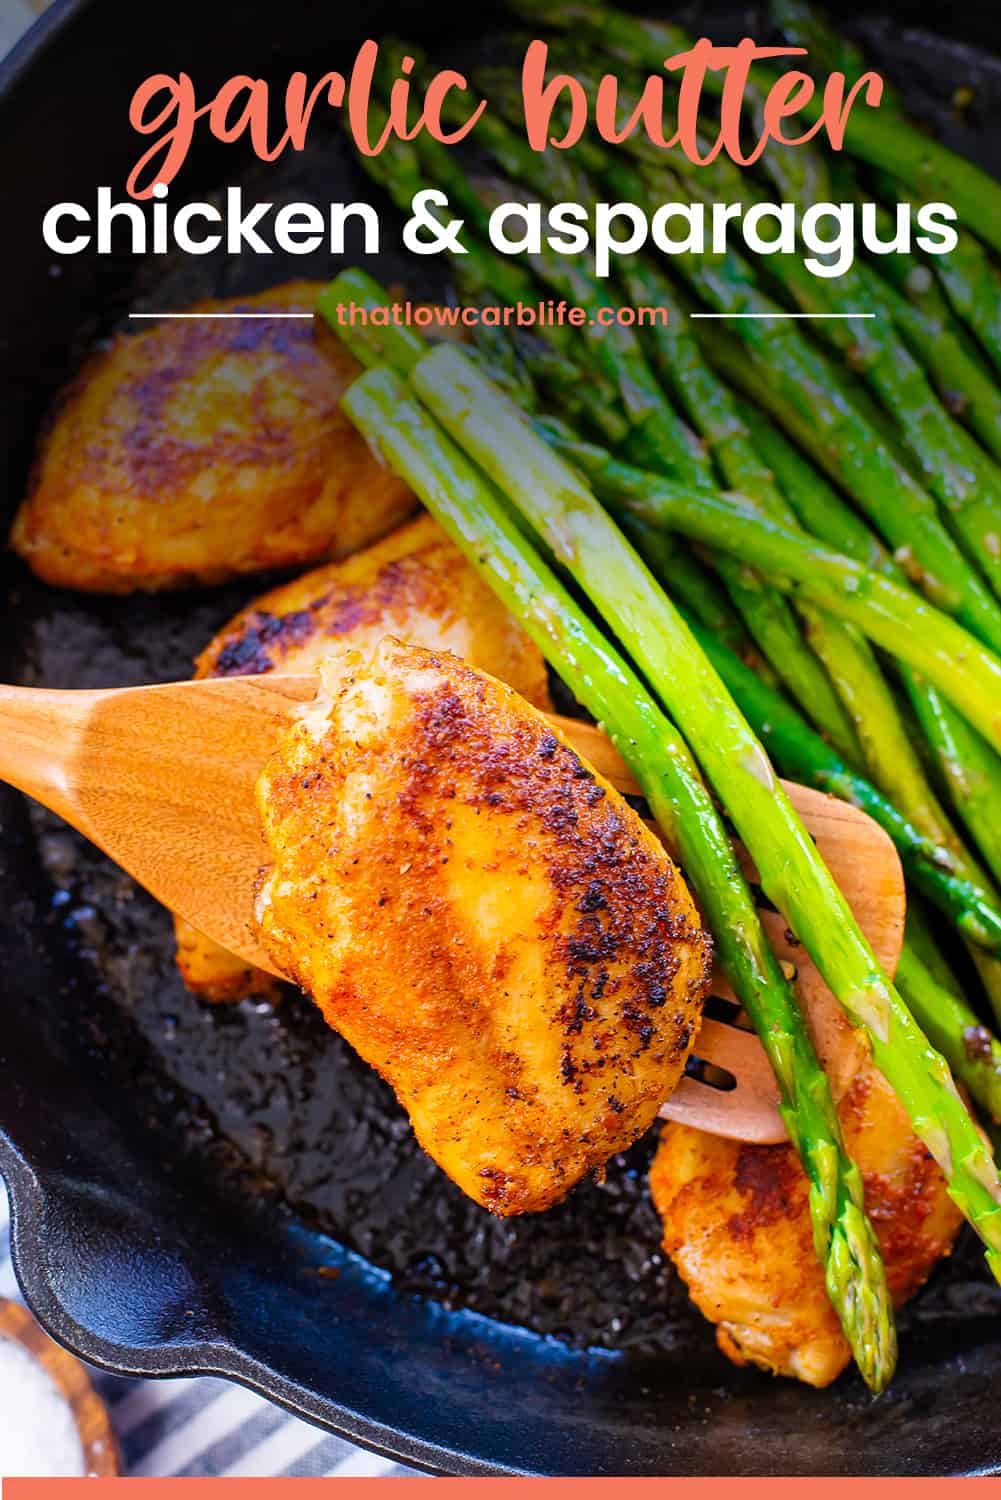 Chicken thighs and asparagus in cast iron skillet.